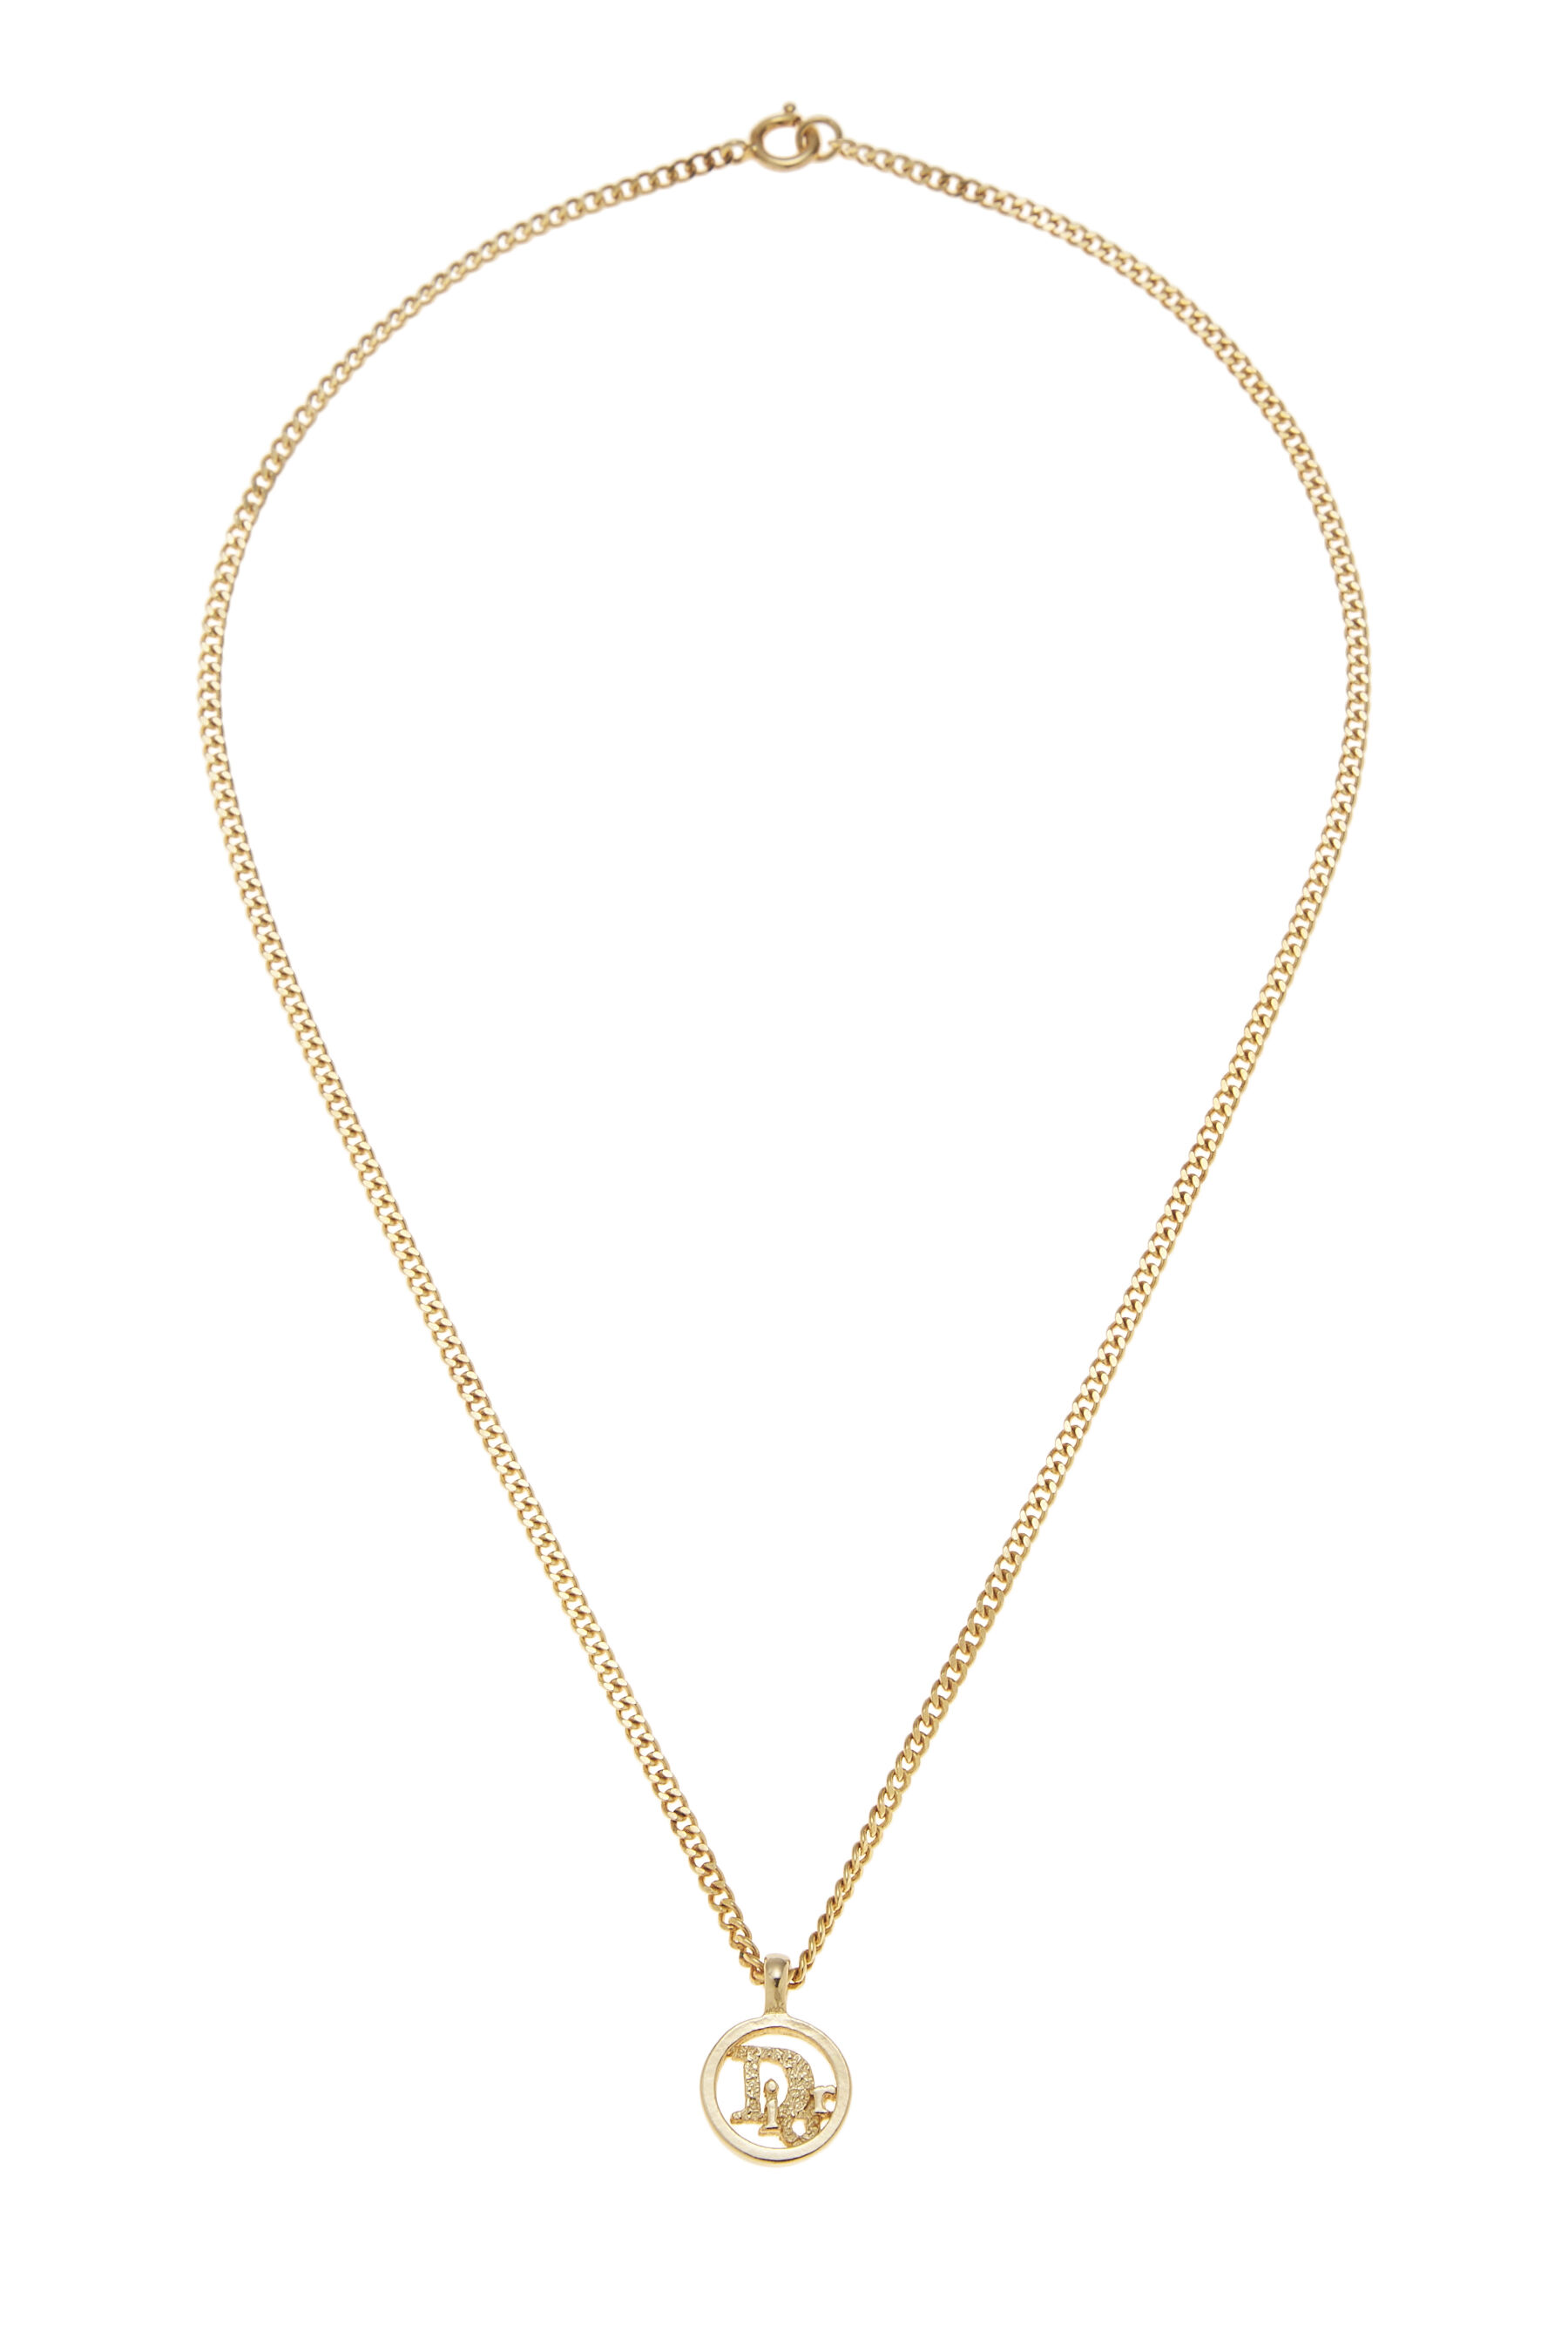 Gold Dior Charm Necklace